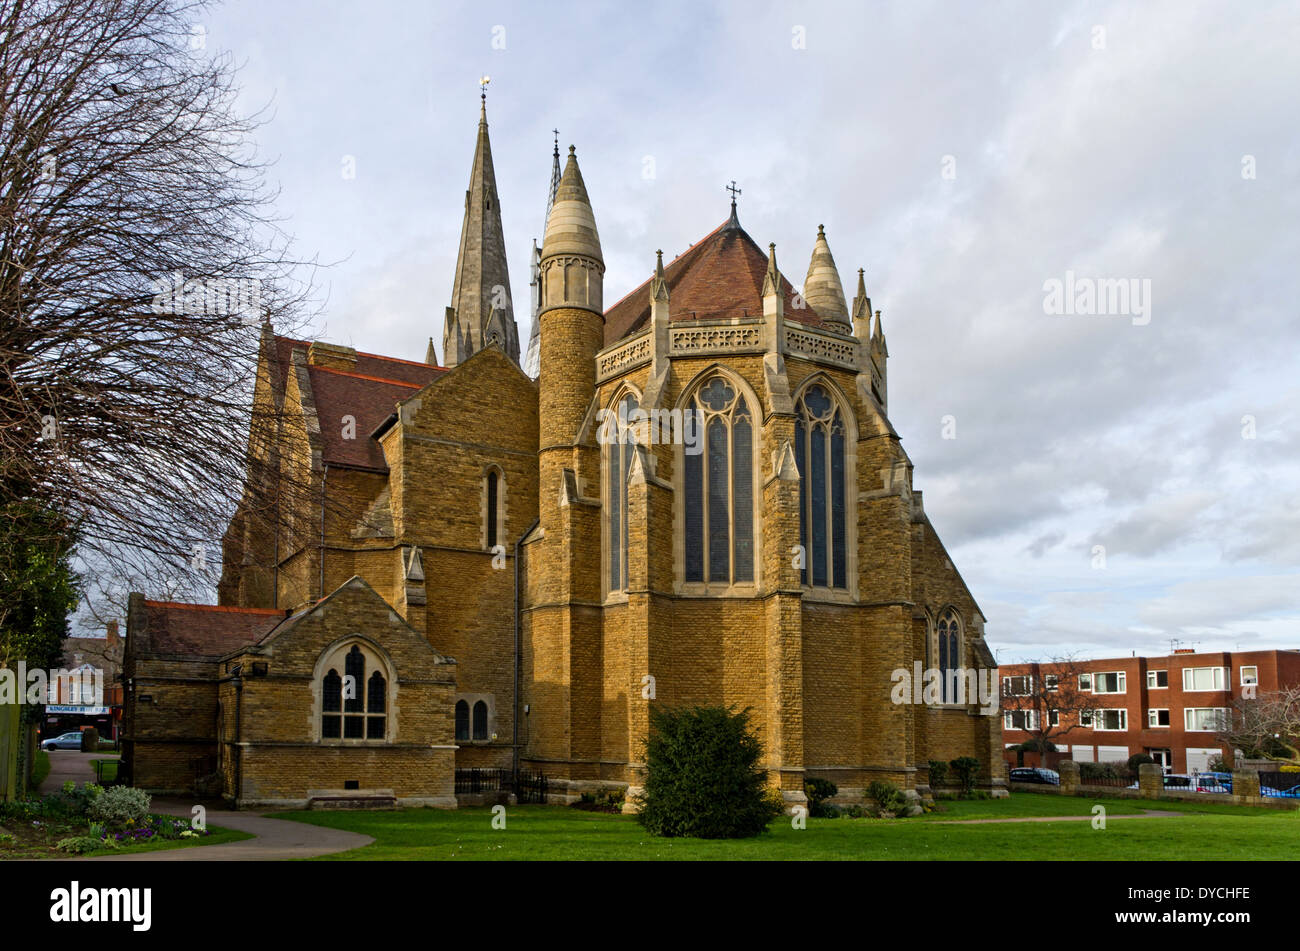 St Matthew's Church,  Northampton UK; built in 1893 as a memorial to Pickering Phipps, head of Phipps Brewery. Stock Photo